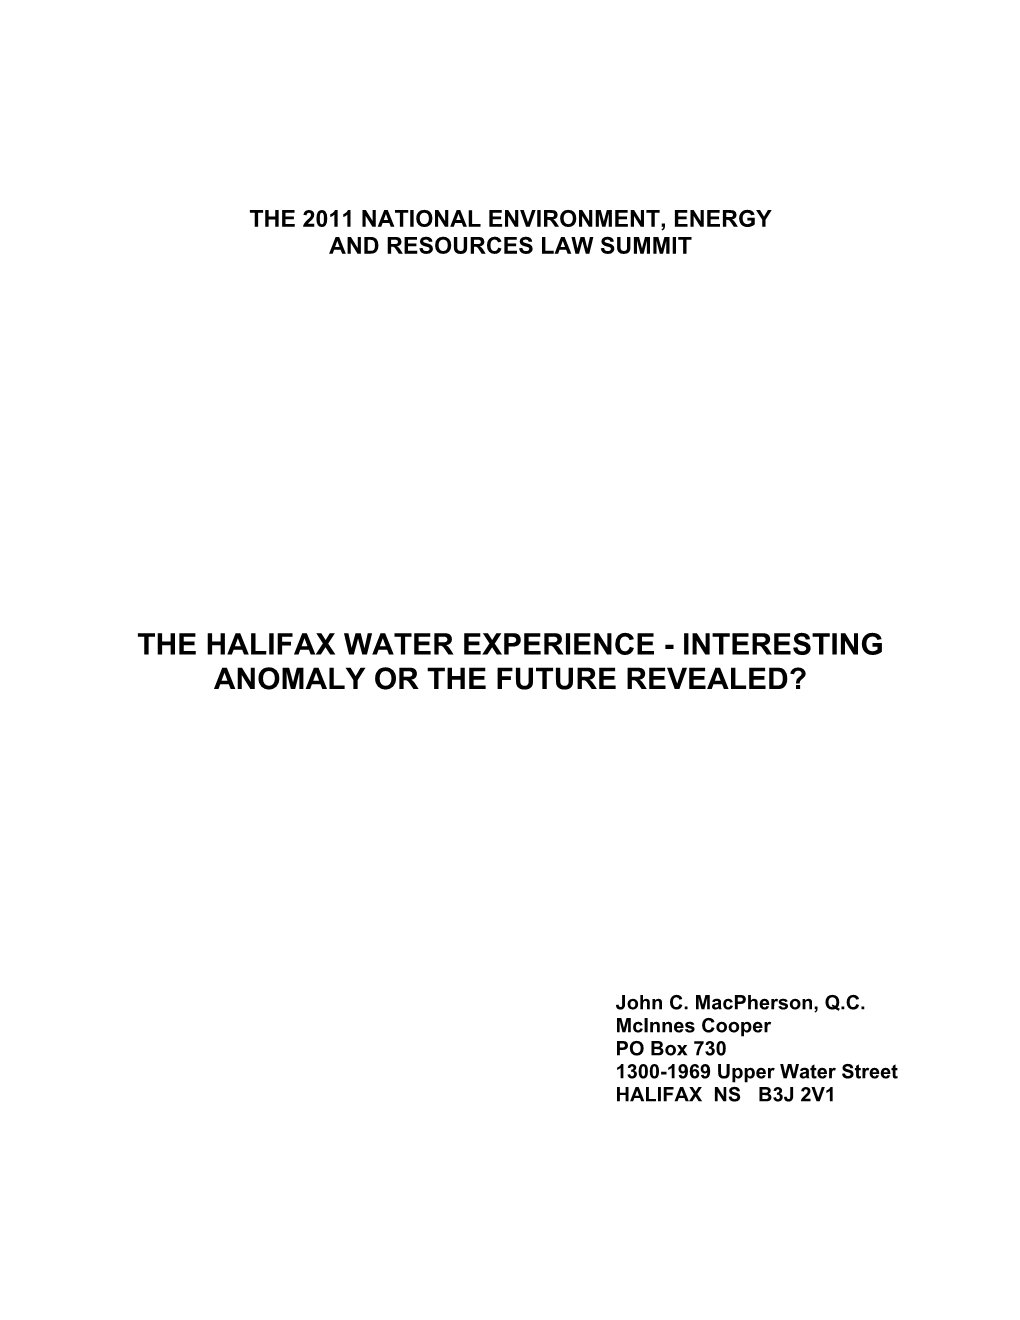 The Halifax Water Experience - Interesting Anomaly Or the Future Revealed?